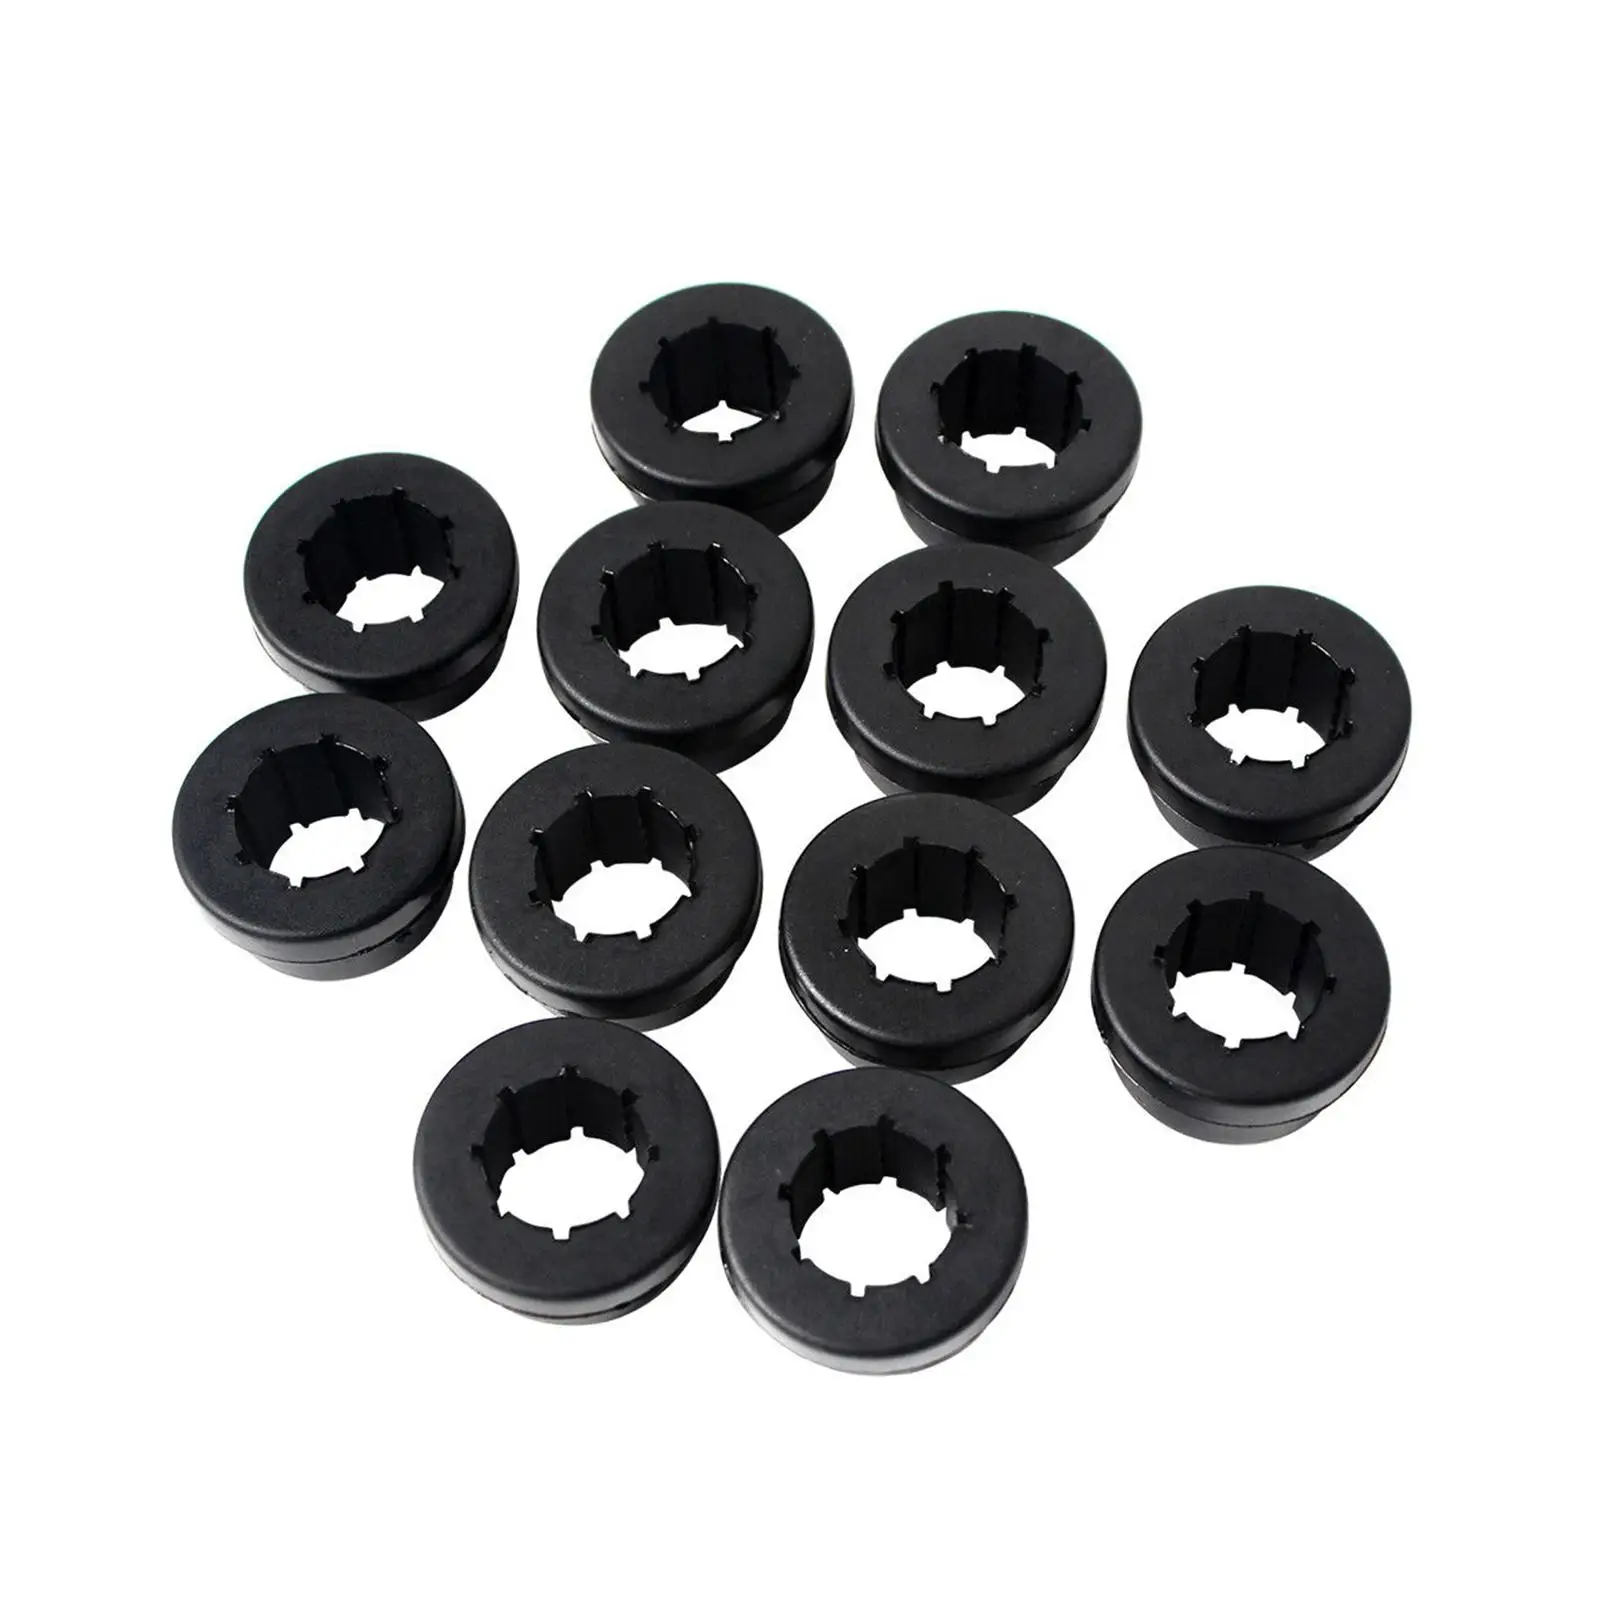 12Pcs Lower Control Arm Rear Camber Bushings High Quality Direct Replacement Parts for Skunk2 Eg EK DC Automotive Accessories